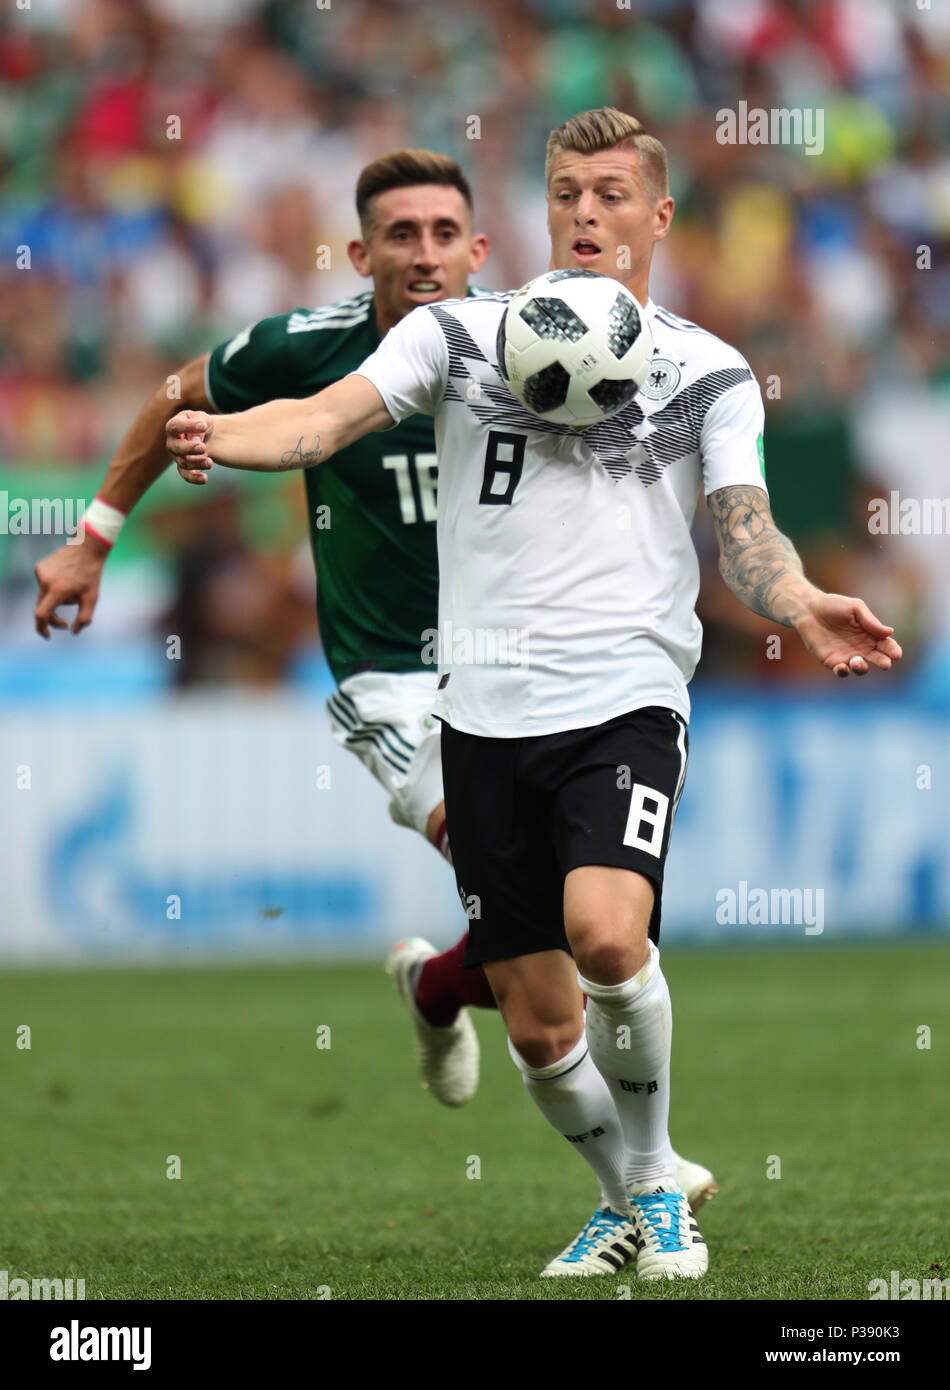 Hector Herrera & Toni Kroos GERMANY V MEXICO GERMANY V MEXICO, 2018 FIFA WORLD CUP RUSSIA 17 June 2018 GBC8277 2018 FIFA World Cup Russia STRICTLY EDITORIAL USE ONLY. If The Player/Players Depicted In This Image Is/Are Playing For An English Club Or The England National Team. Then This Image May Only Be Used For Editorial Purposes. No Commercial Use. The Following Usages Are Also Restricted EVEN IF IN AN EDITORIAL CONTEXT: Use in conjuction with, or part of, any unauthorized audio, video, data, fixture lists, club/league logos, Betting, Games or any 'live' services. Also R Stock Photo